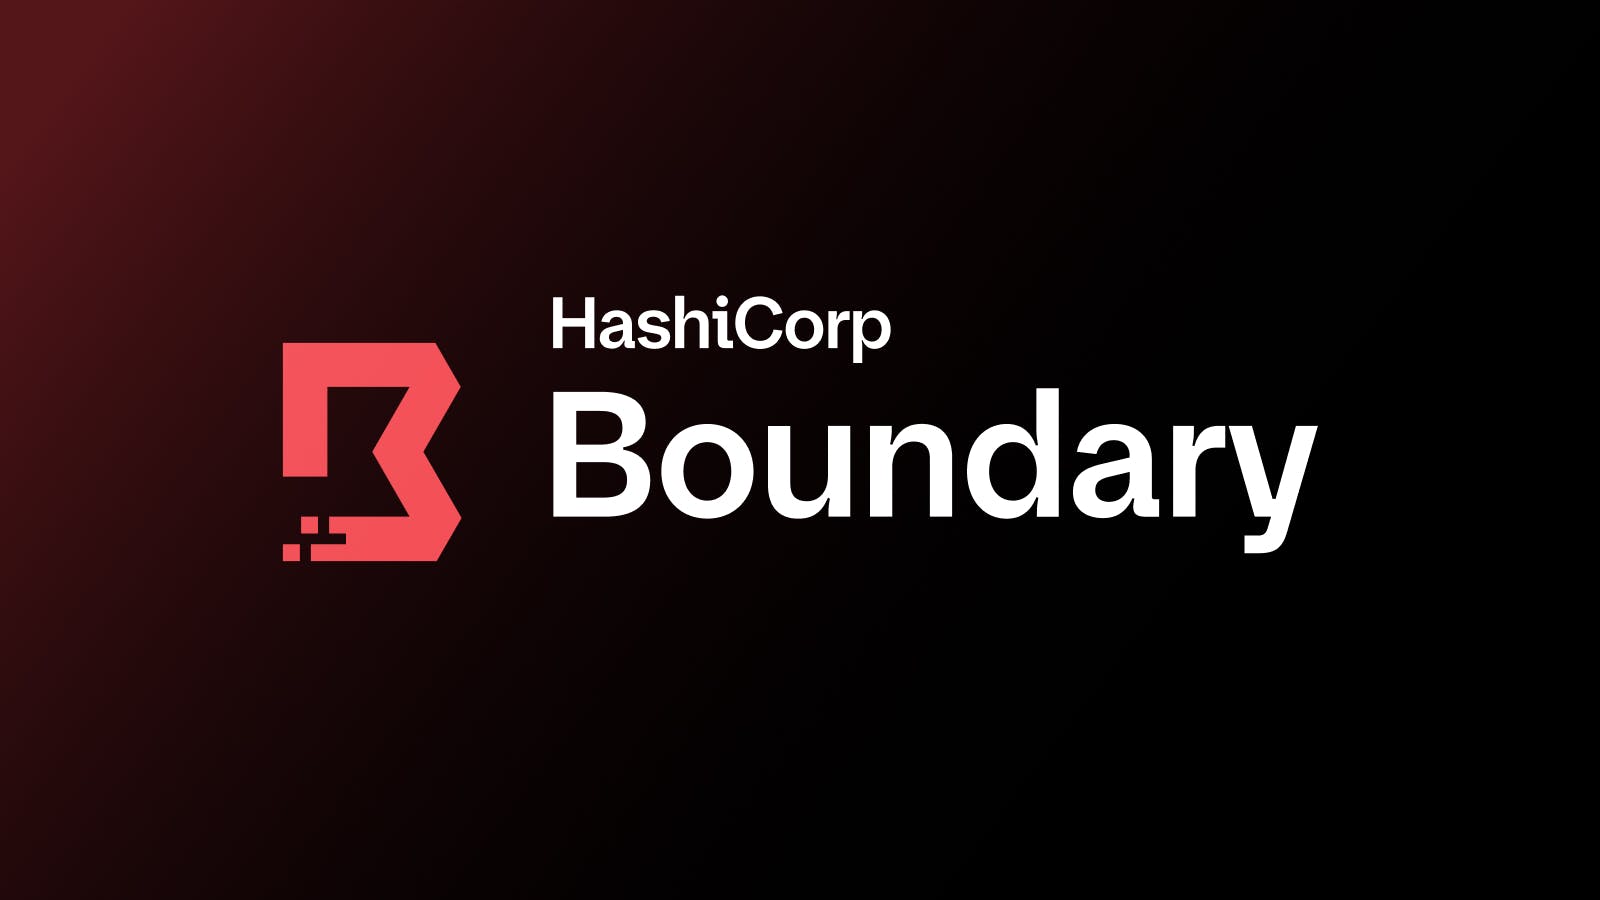 Event-Driven Access Controls with HashiCorp Boundary and Vault